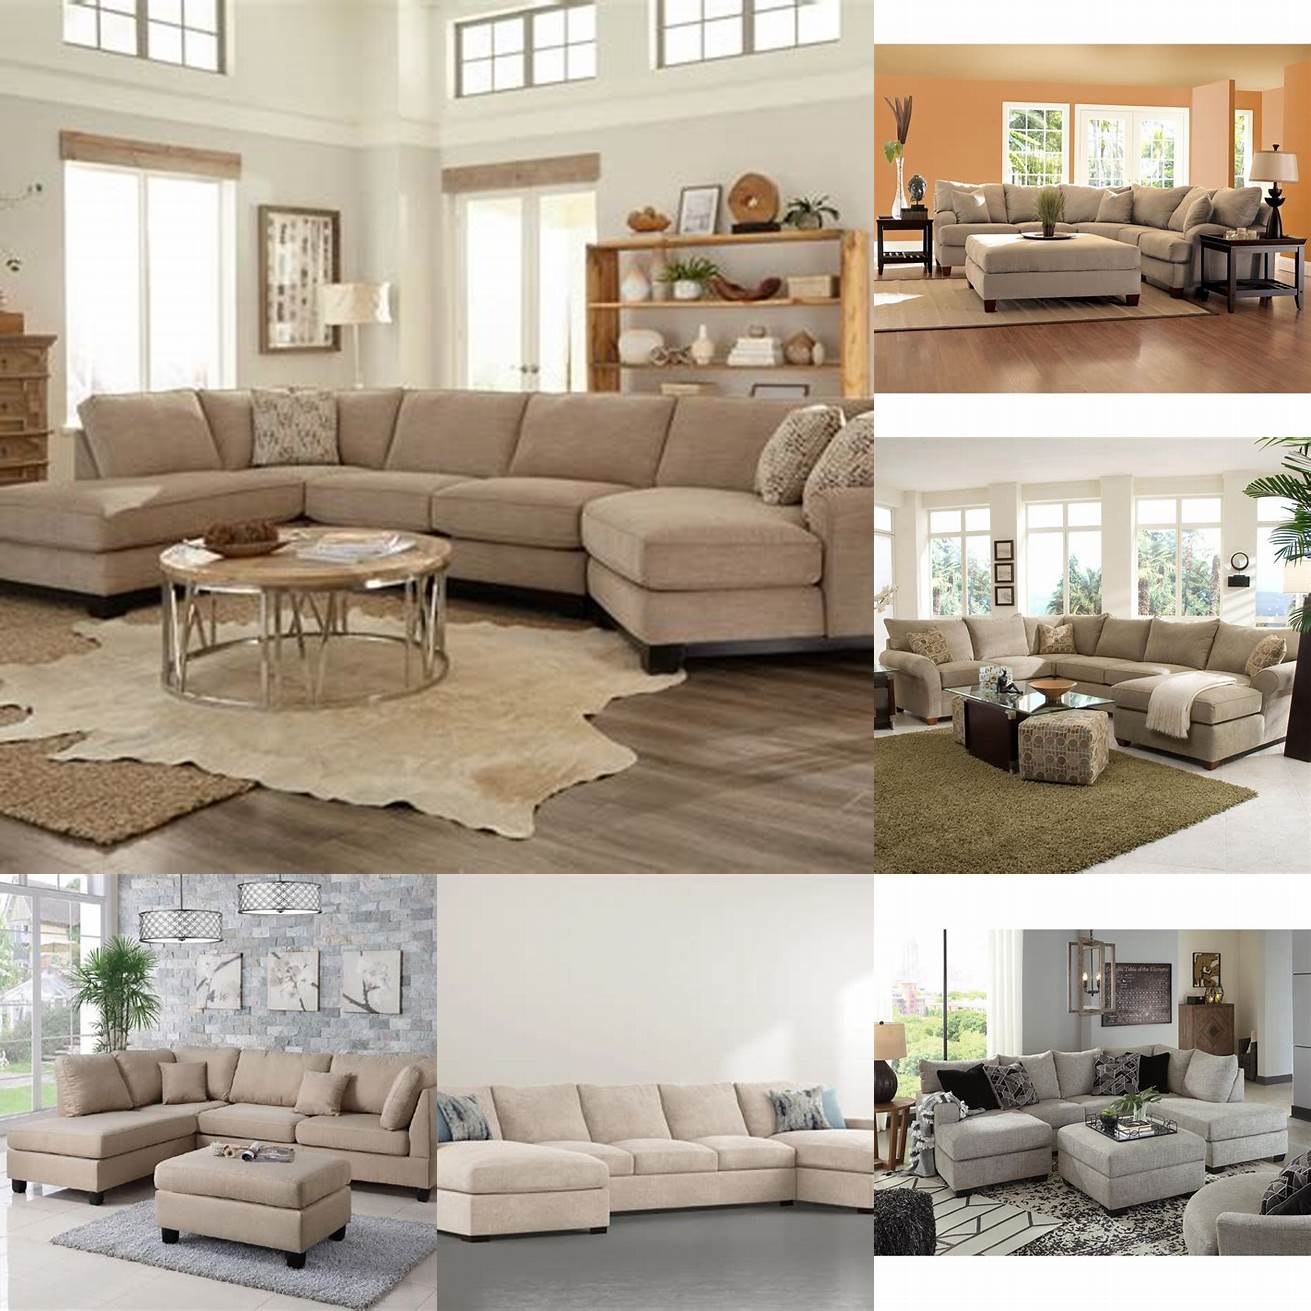 A 3 piece sectional sofa in beige color complements any living room decor